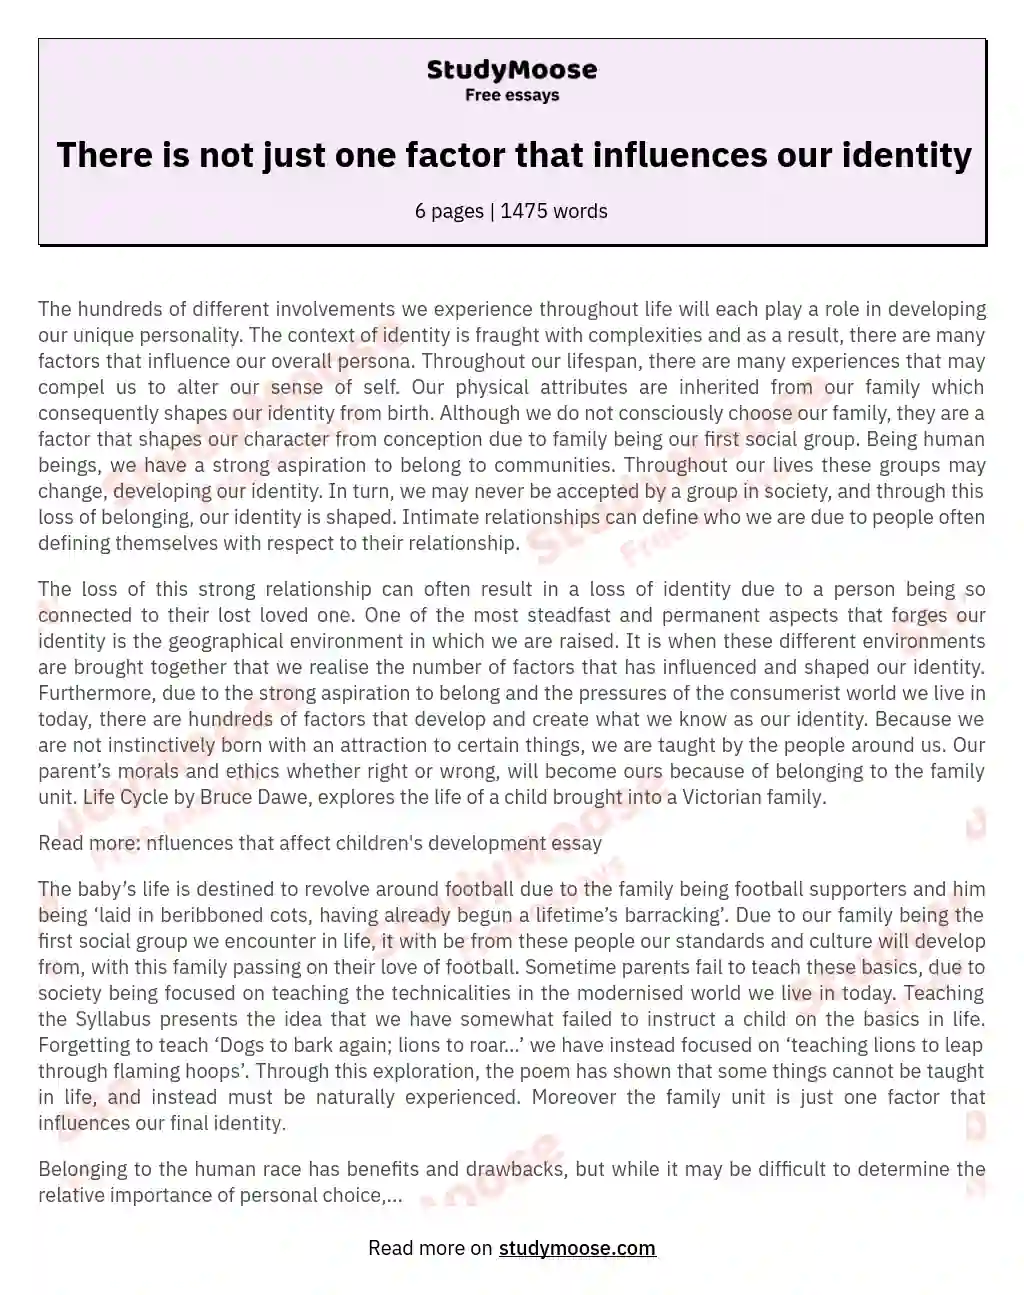 There is not just one factor that influences our identity essay